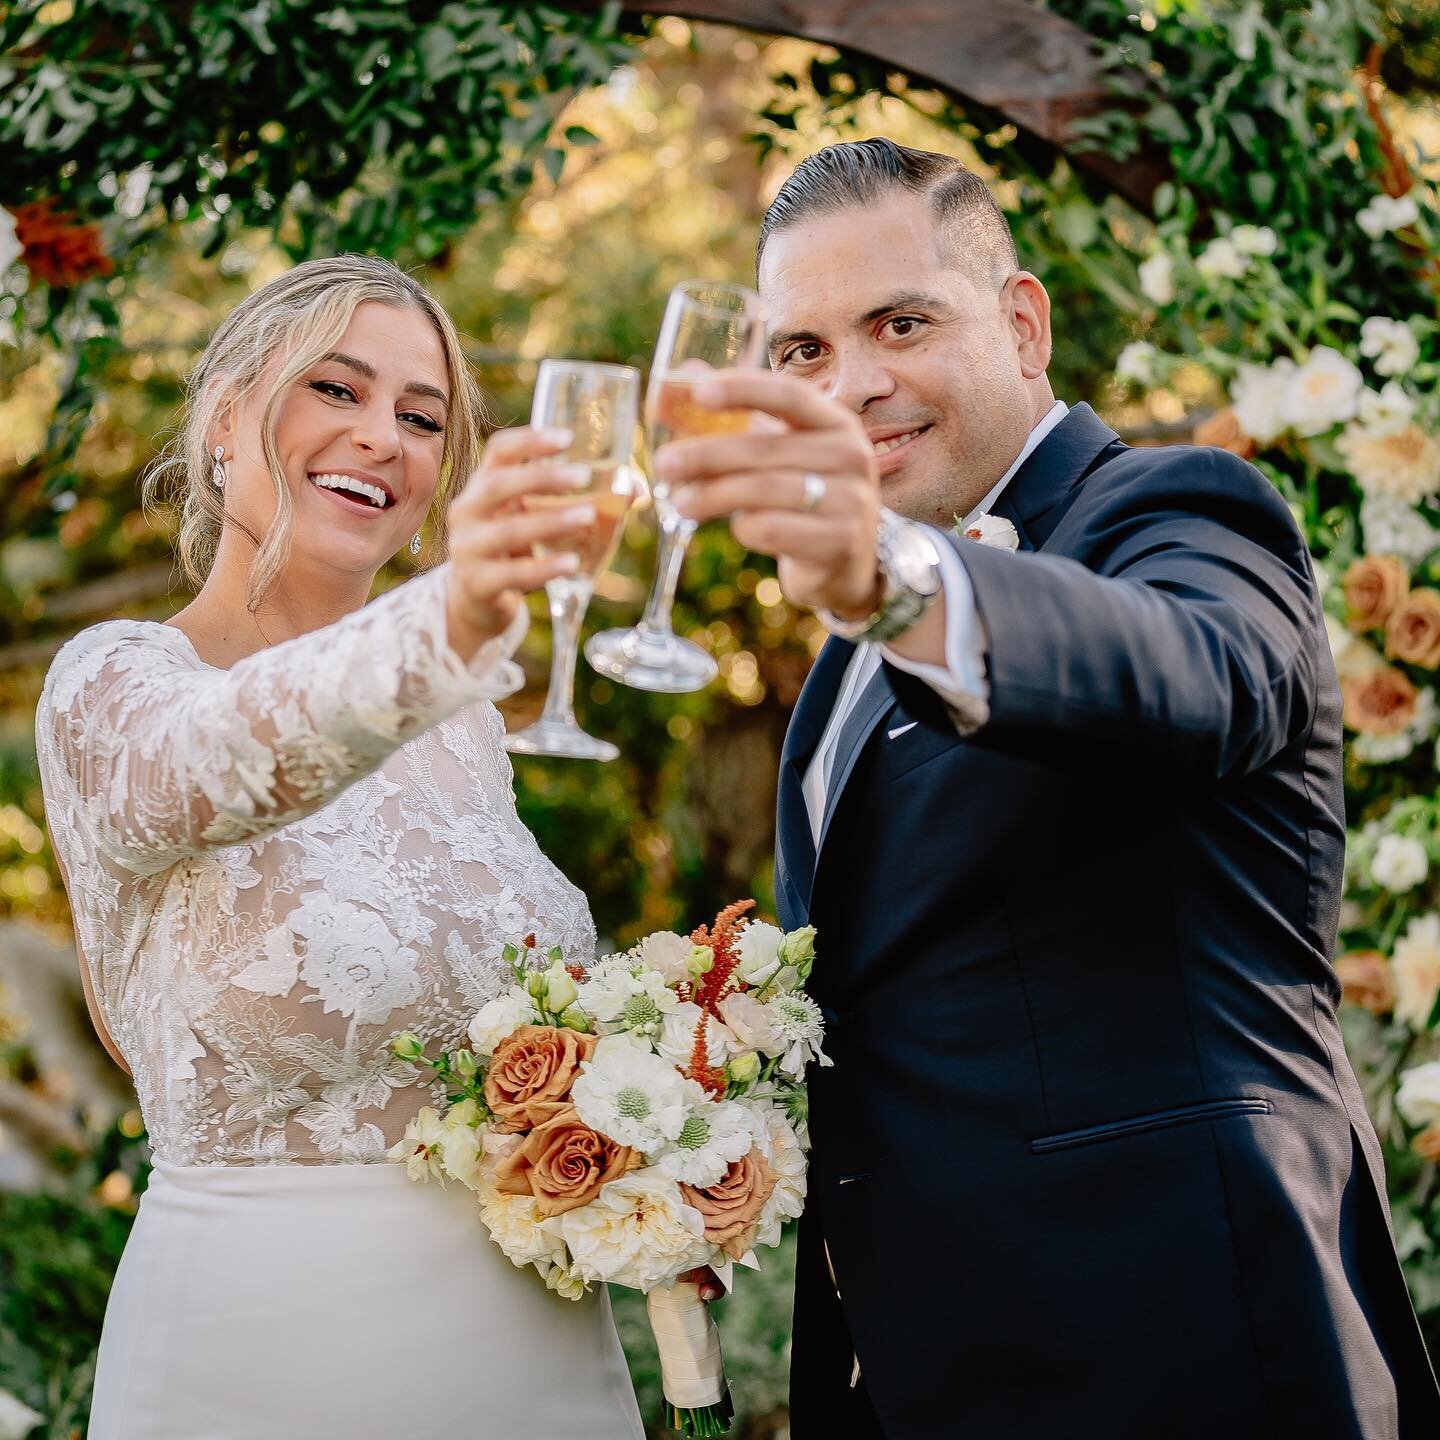 Cheers to the newlyweds!🥂❤️
&bull;
&bull;
&bull;
&bull;
@hautweddings 🎥📸✨

Your most important memories deserve to be preserved in the most authentic way possible. 

Schedule a call with our studio manager to learn more about Haut Weddings and rec